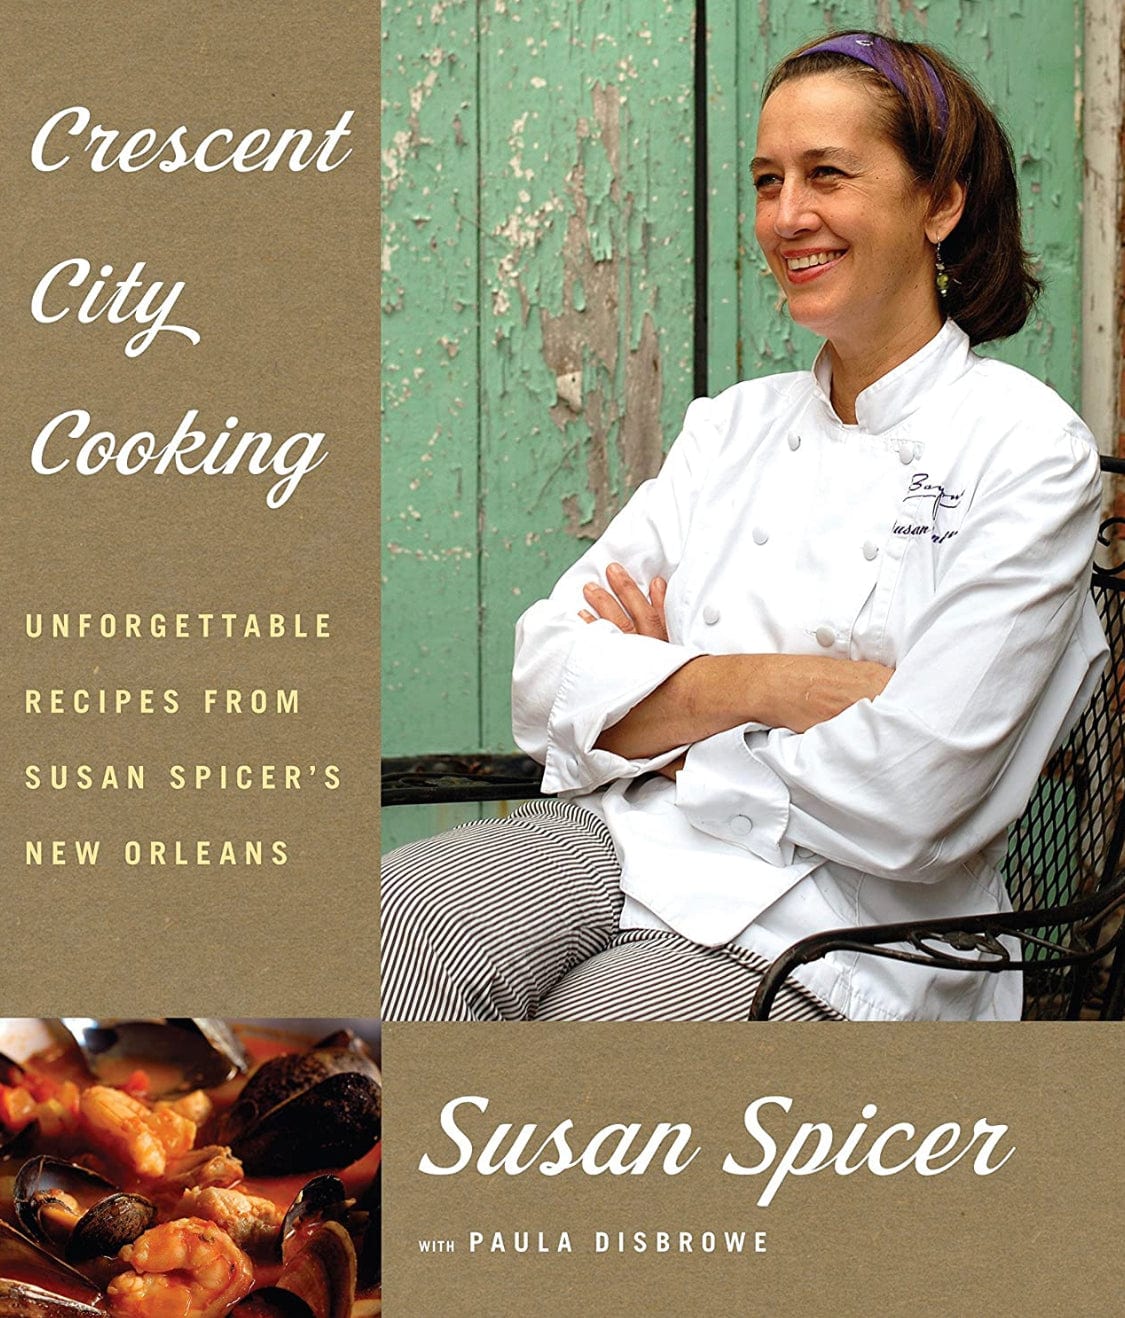 LBC - Looziana Book Company Llc Looziana Book Company Crescent City Cooking: Unforgettable Recipes from Susan Spicer's New Orleans: A Cookbook - Little Miss Muffin Children & Home